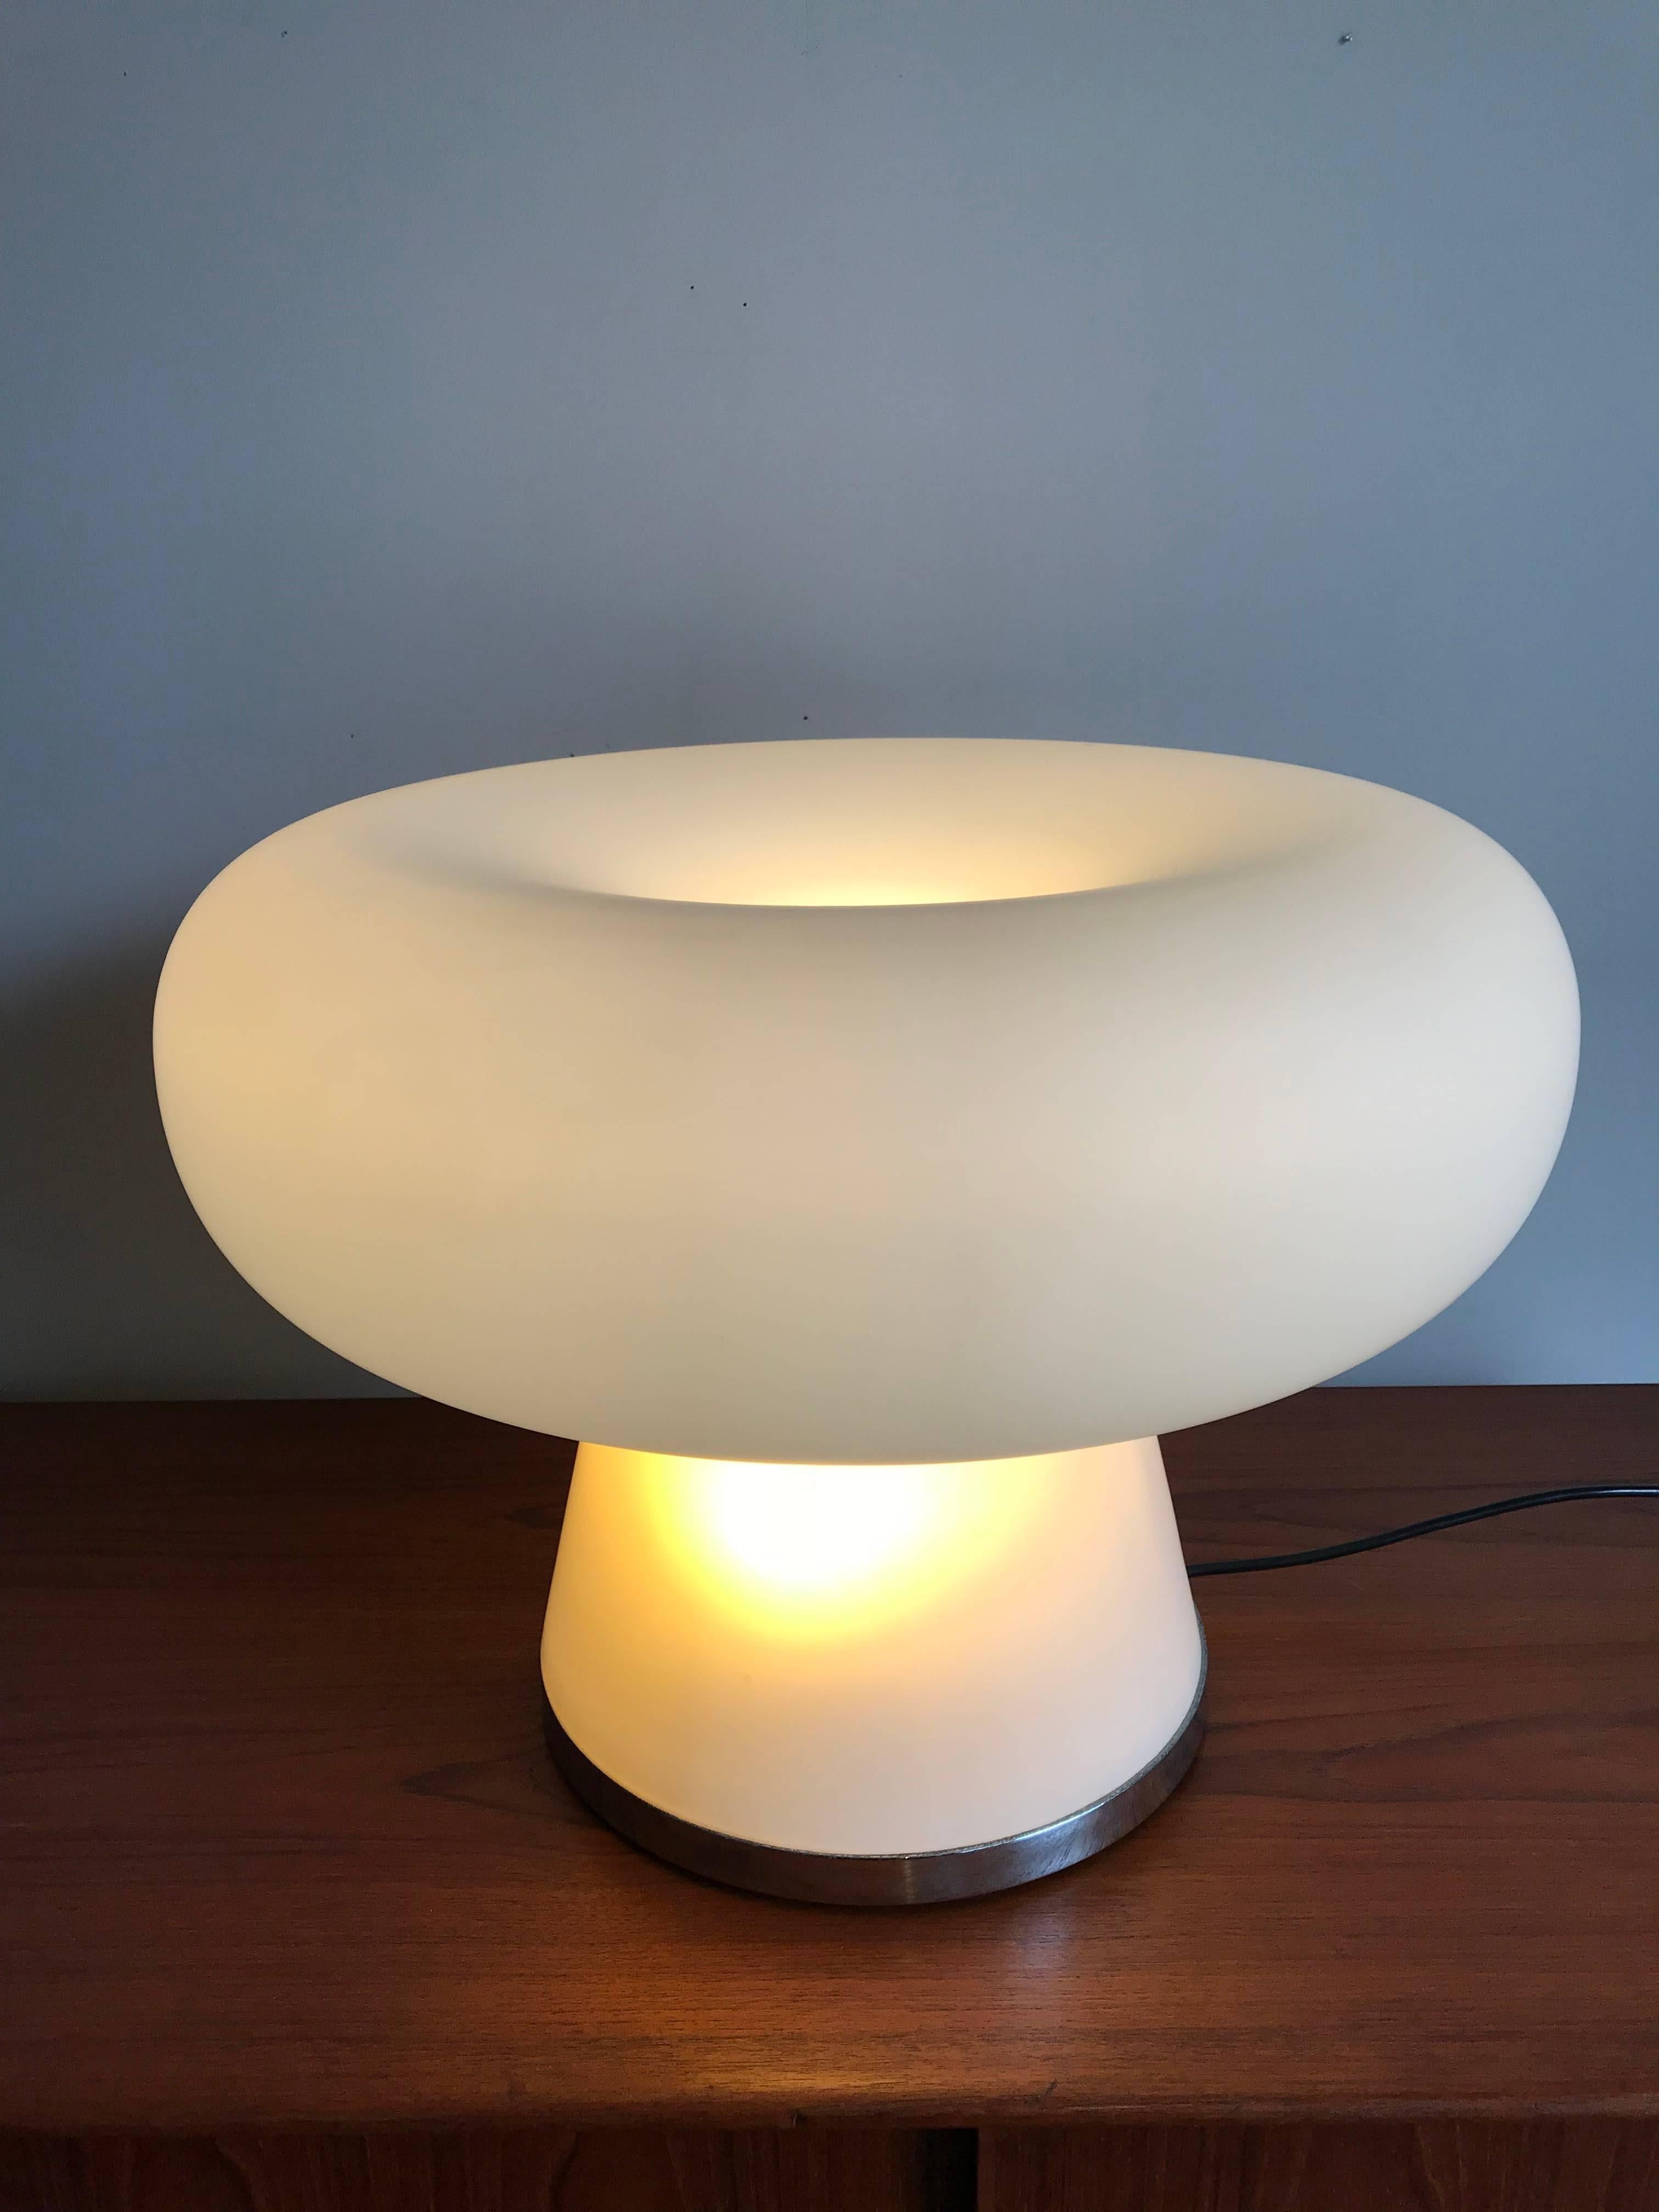 Fontana Arte very rare amazing big Italian table lamp model 2431, produced in 1966, glazed white double diffuser glass screens, chromium-plated brass mounting.